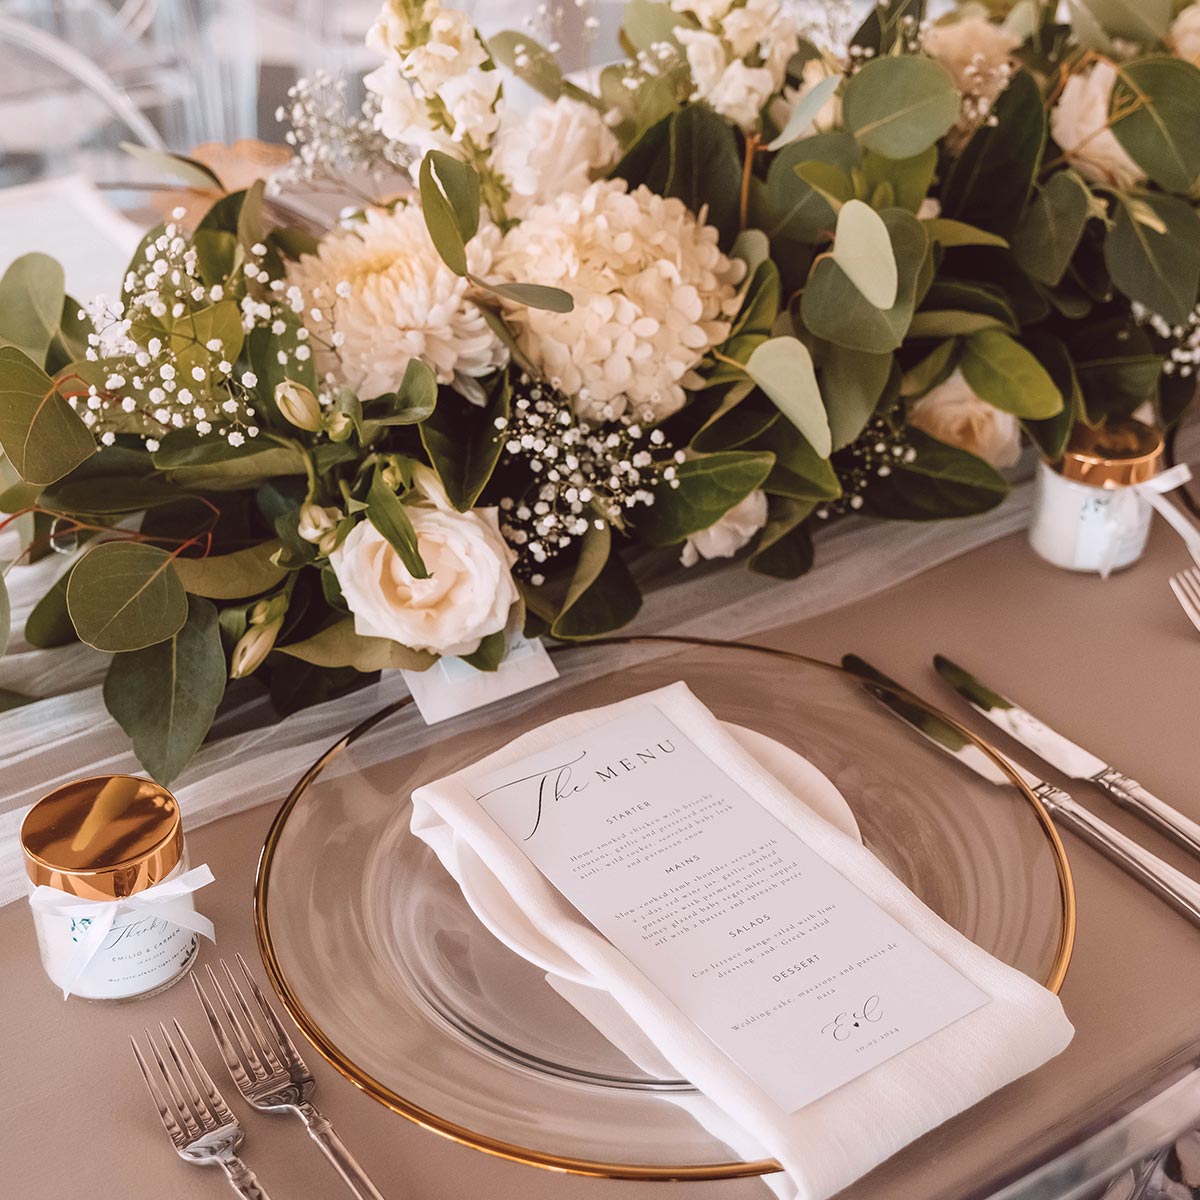 Elegant wedding table setting featuring a clear glass plate with a white napkin and menu, surrounded by lush white floral arrangements and greenery. Fabulous Flowers and Gifts. Weddings.